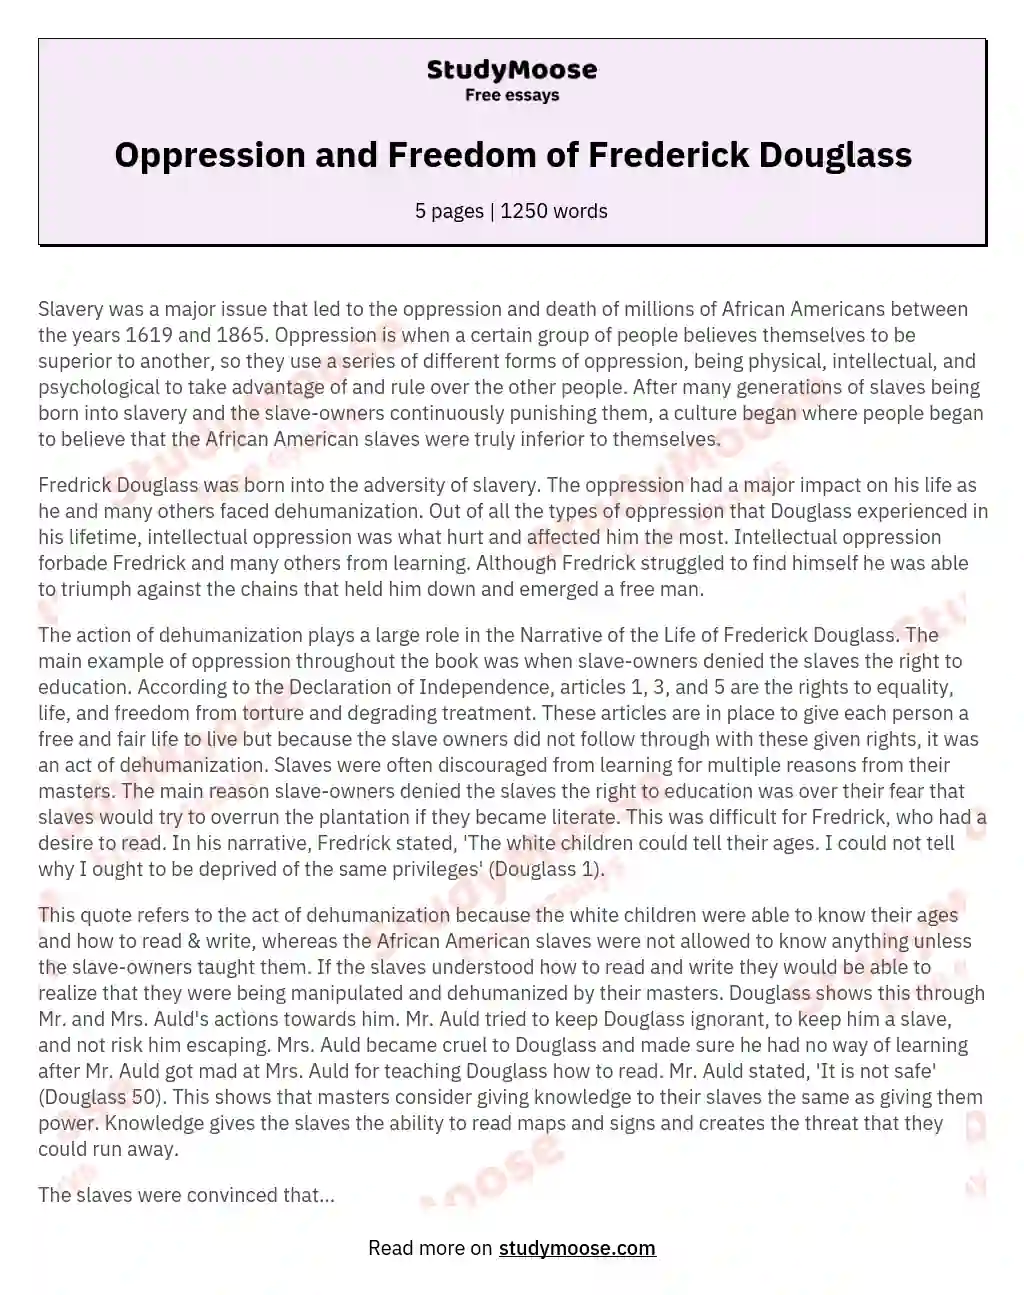 Oppression and Freedom of Frederick Douglass essay